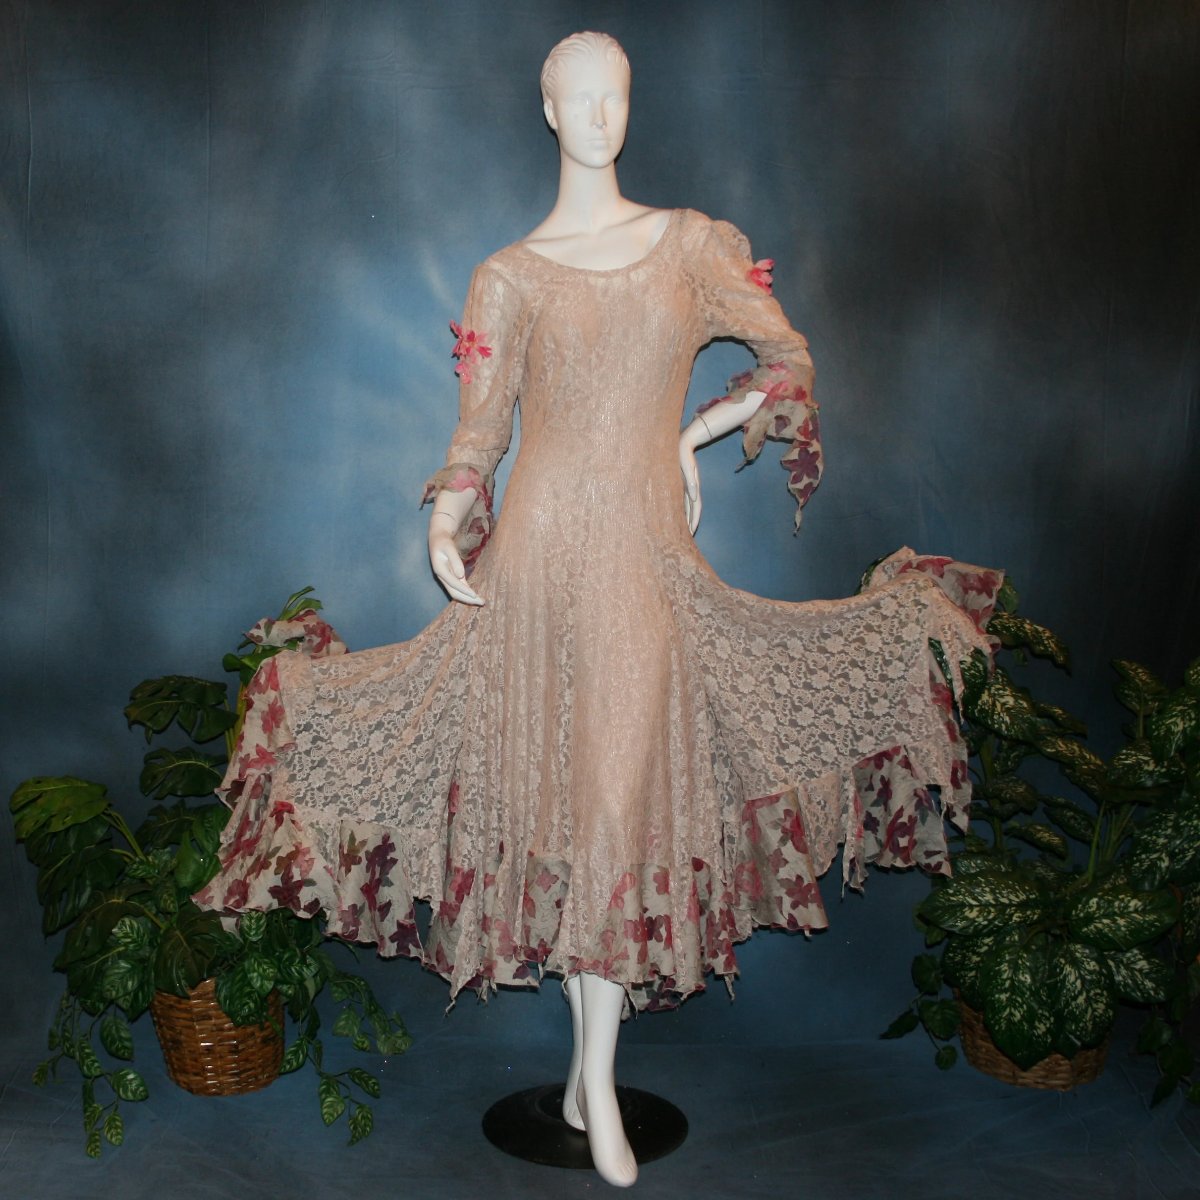 Soft beige social ballroom dress created of beige stretch lace with oodles of beige & pink flower print semi-sheer flounces, a touch of pink silk flowers with beading, & under slip dress. A great beginner ballroom dance show dress!